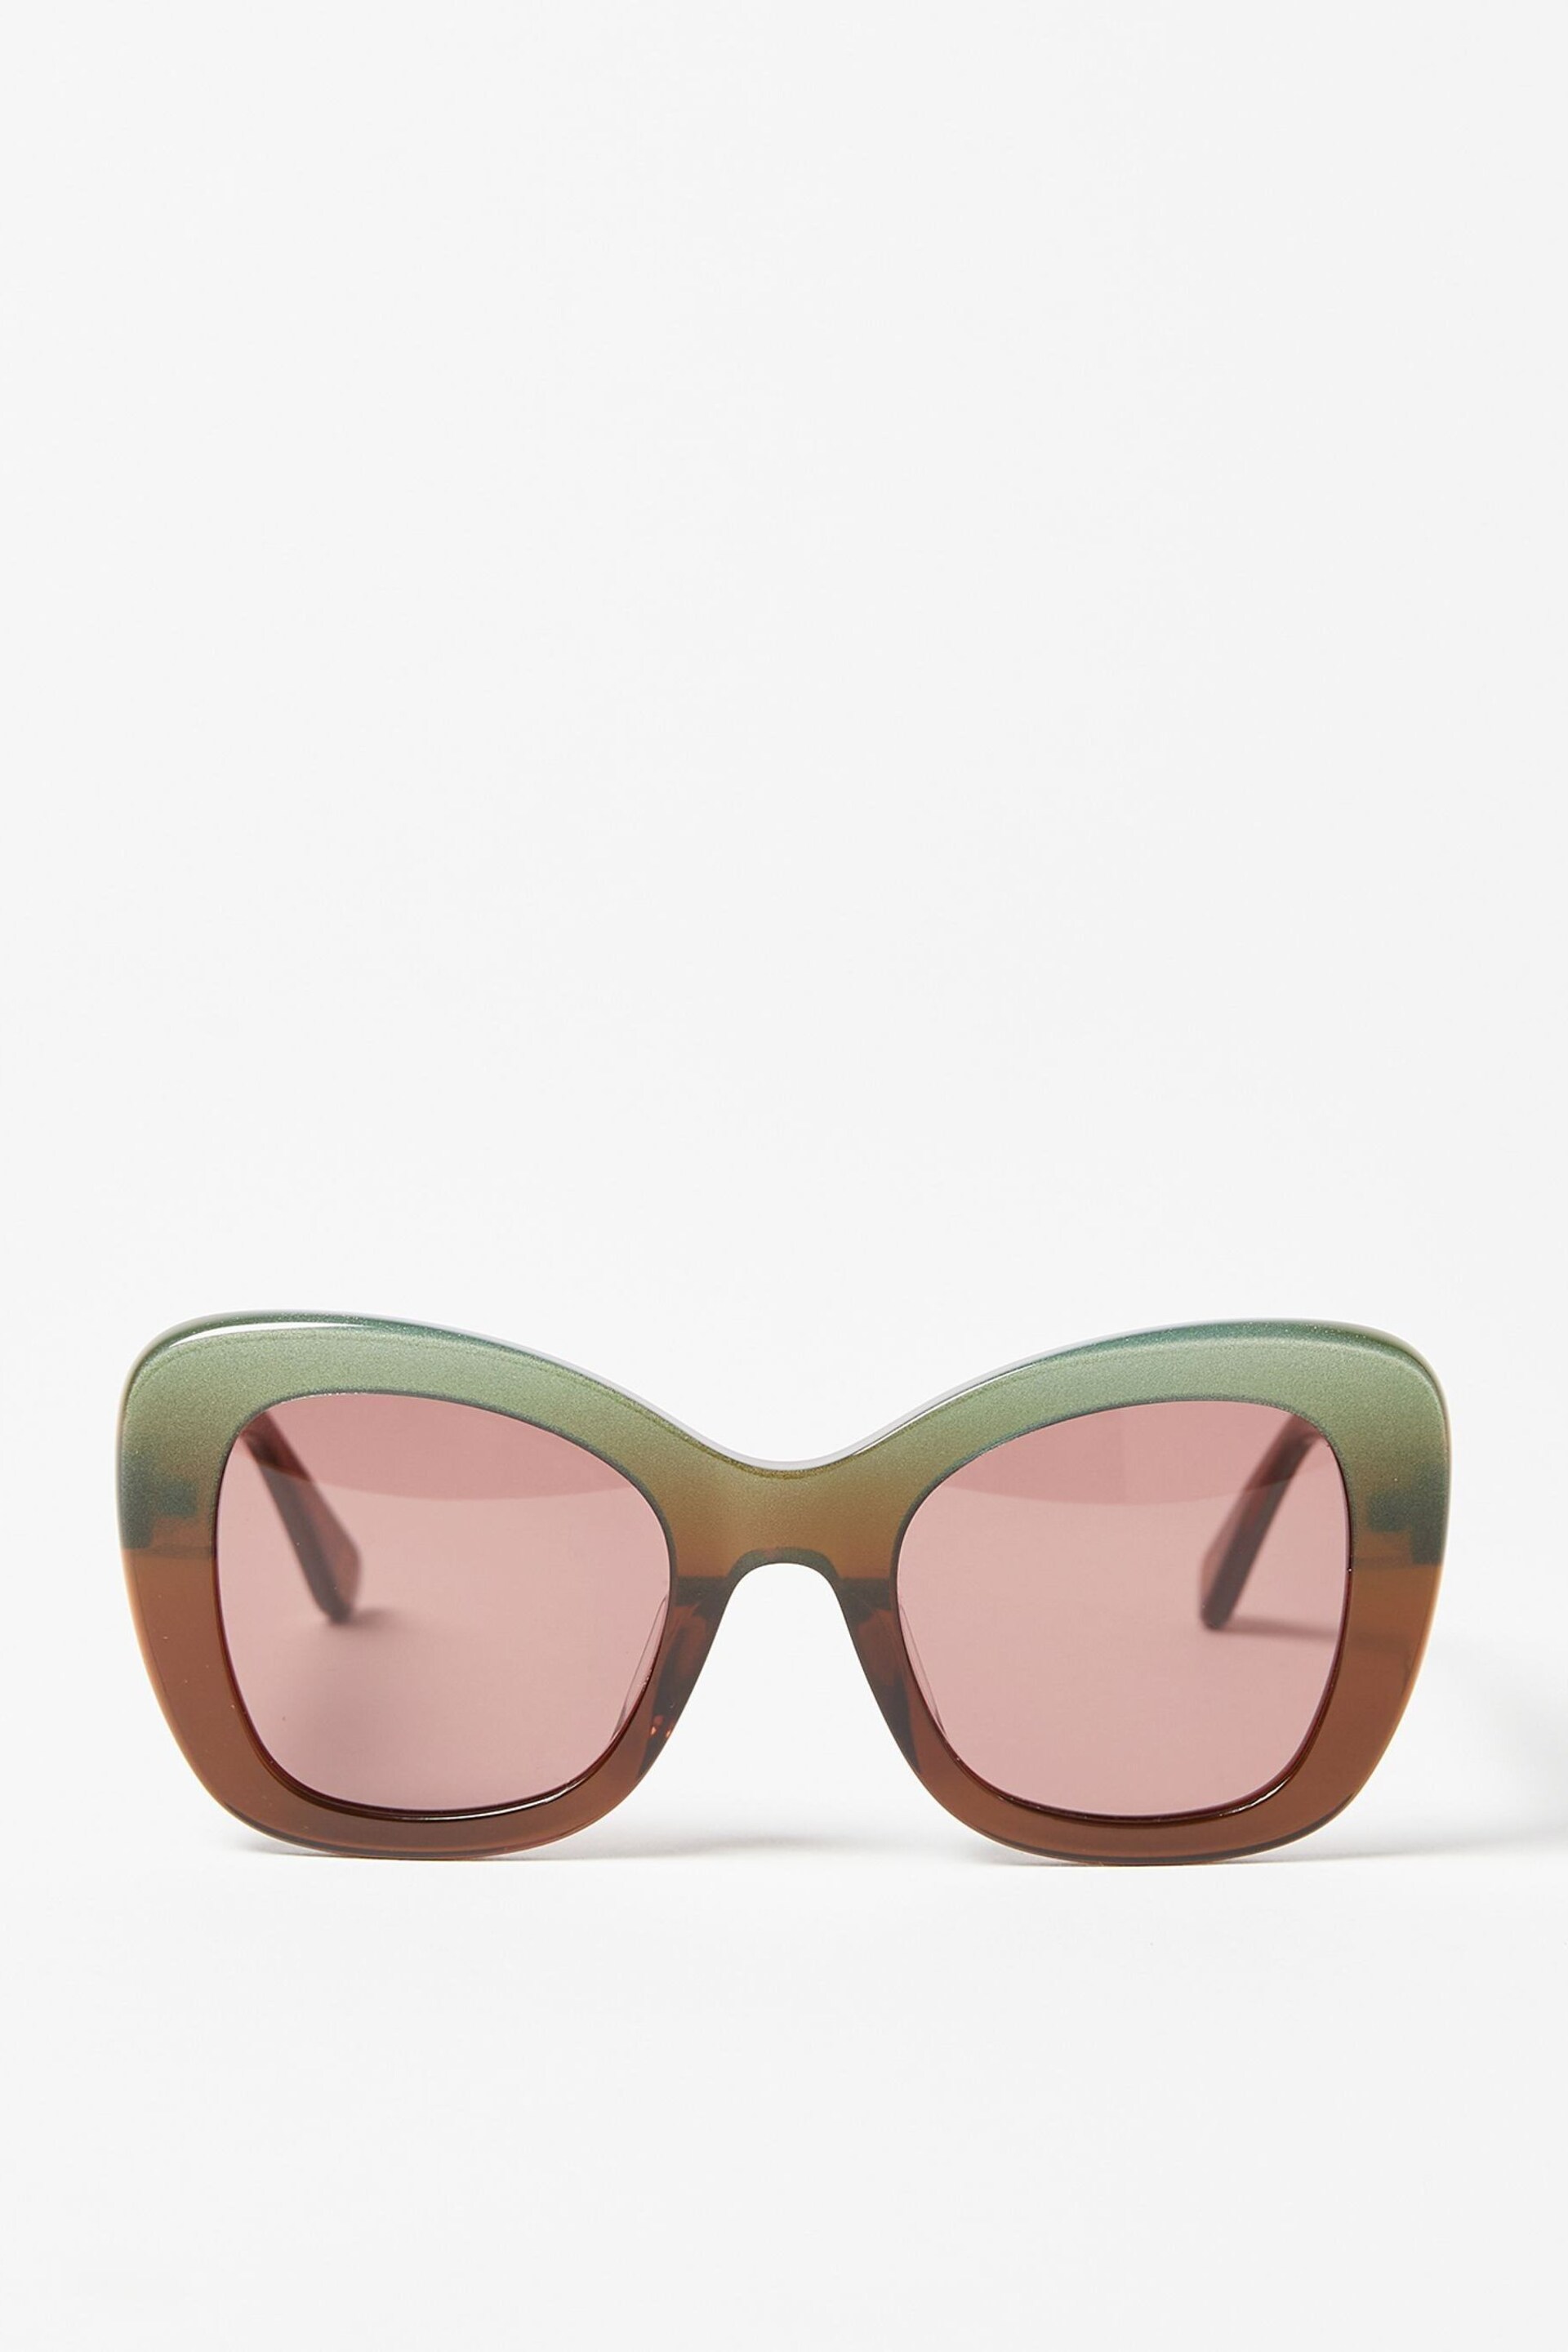 Oliver Bonas Green Ombre Shimmer Butterfly Acetate Sunglasses - Image 1 of 7